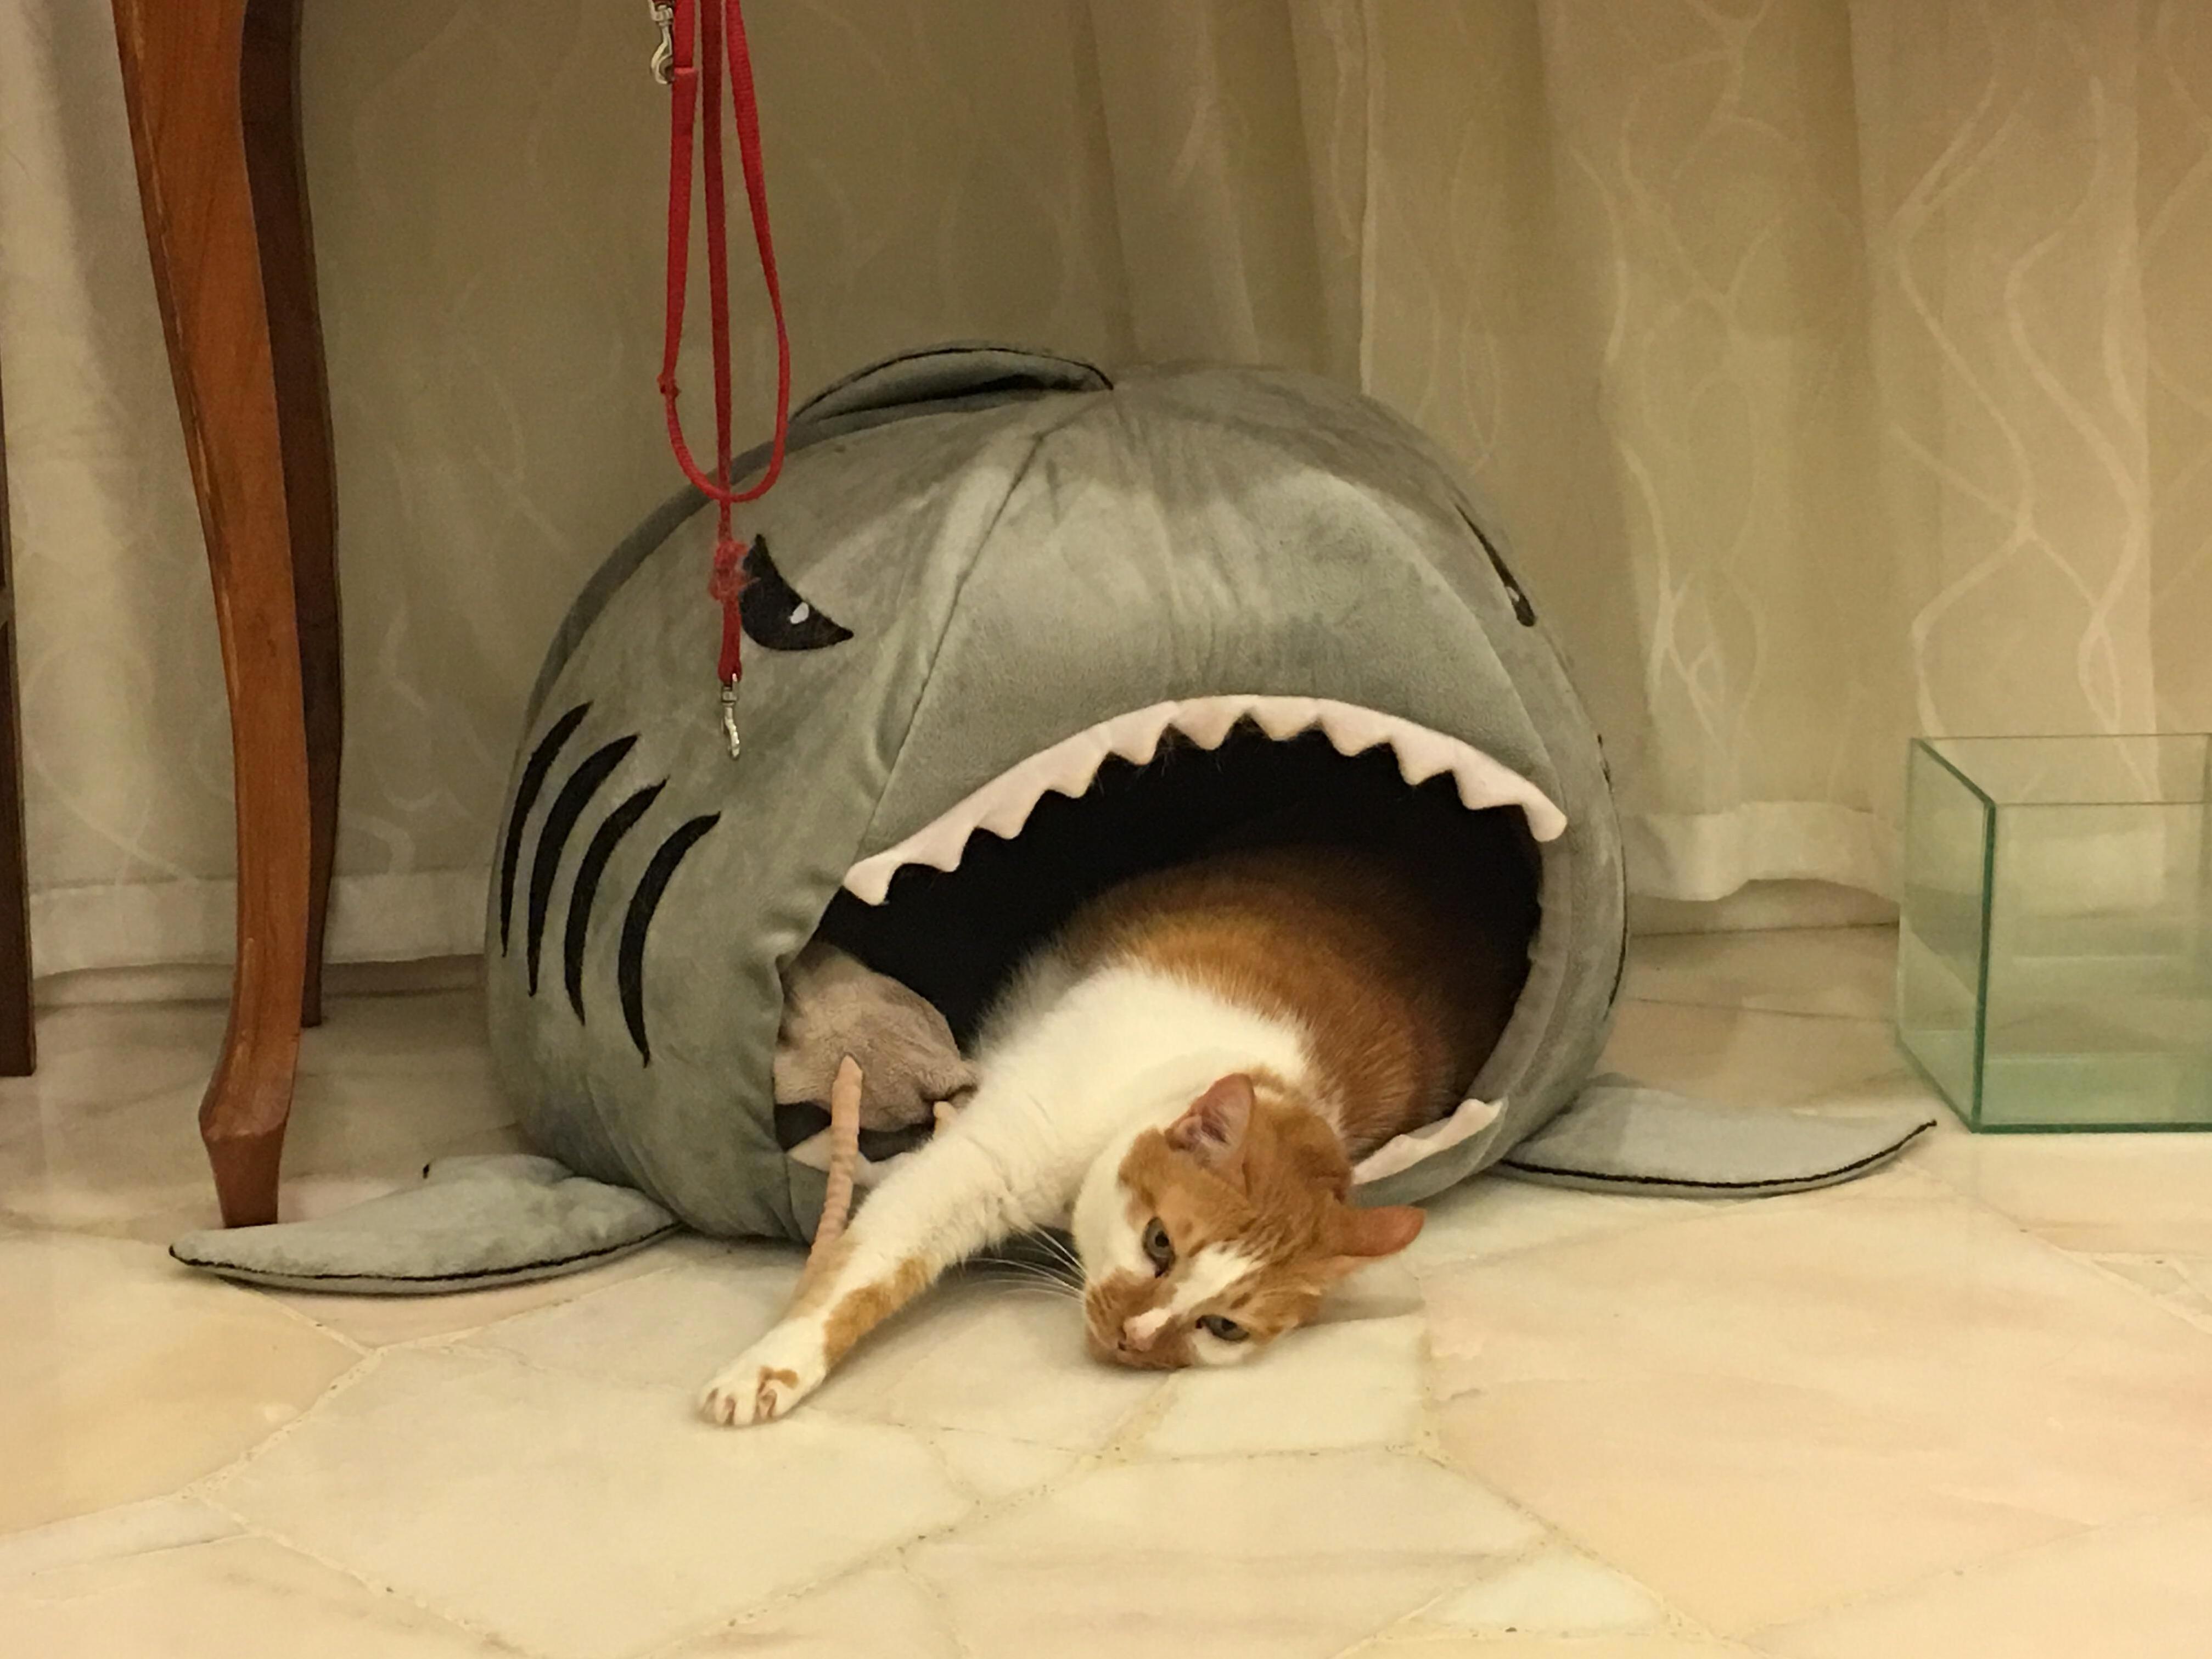 Saw another post with the glorious shark bed, hows mine